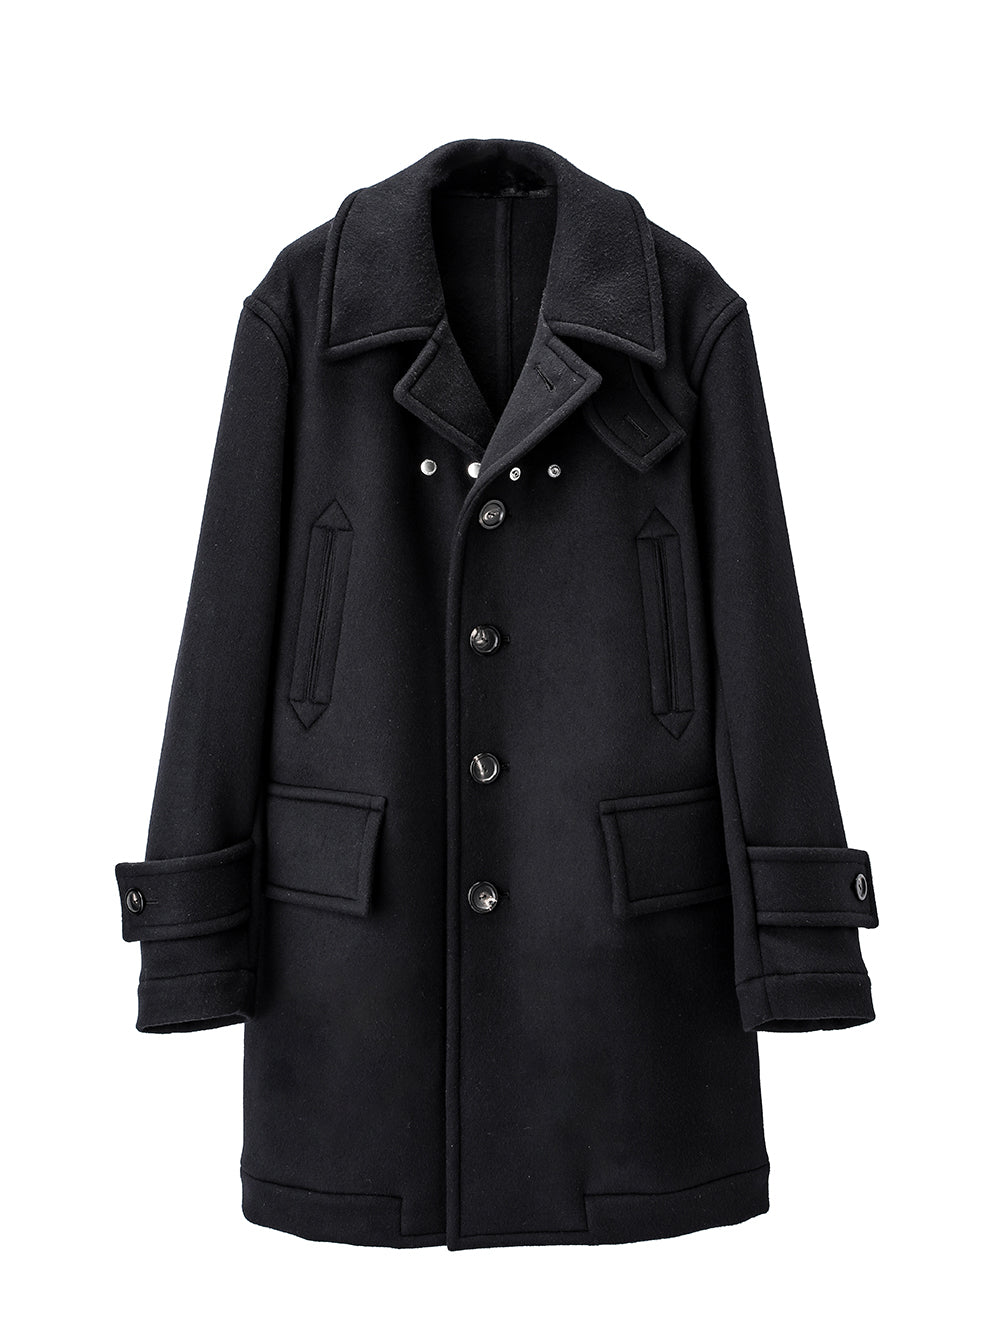 right - left pencil silhouette single breasted peacoat.